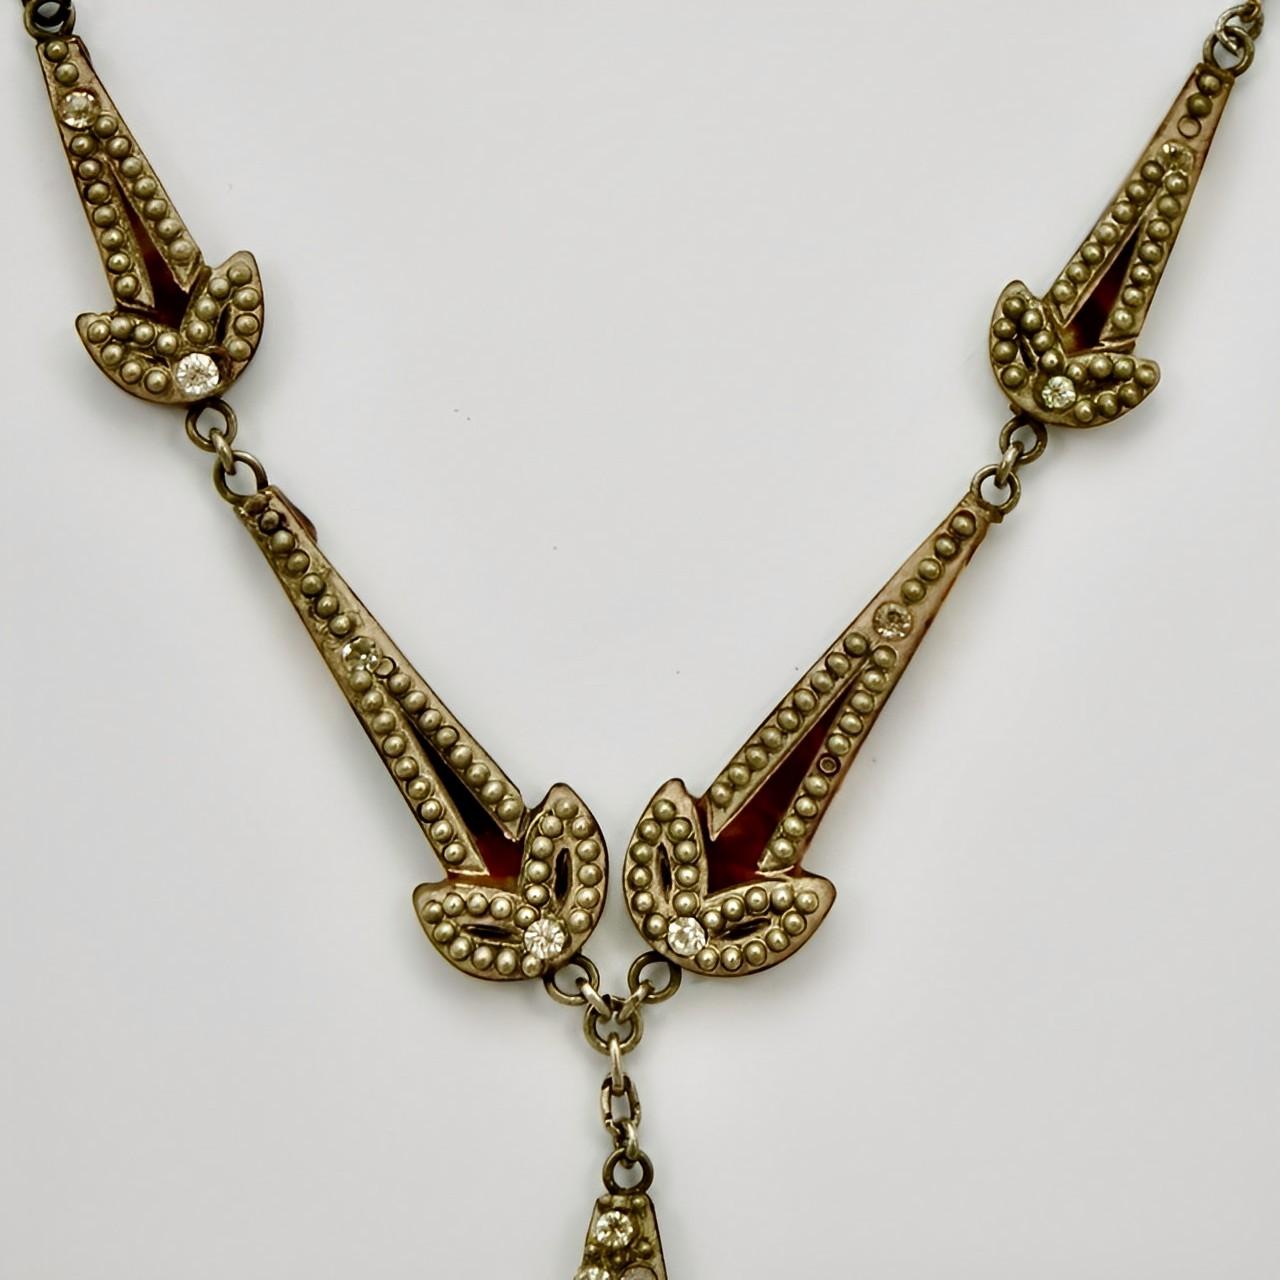 Art Deco Silver Tone Rhinestone Faux Tortoiseshell Necklace with Drop Pendant  In Good Condition For Sale In London, GB